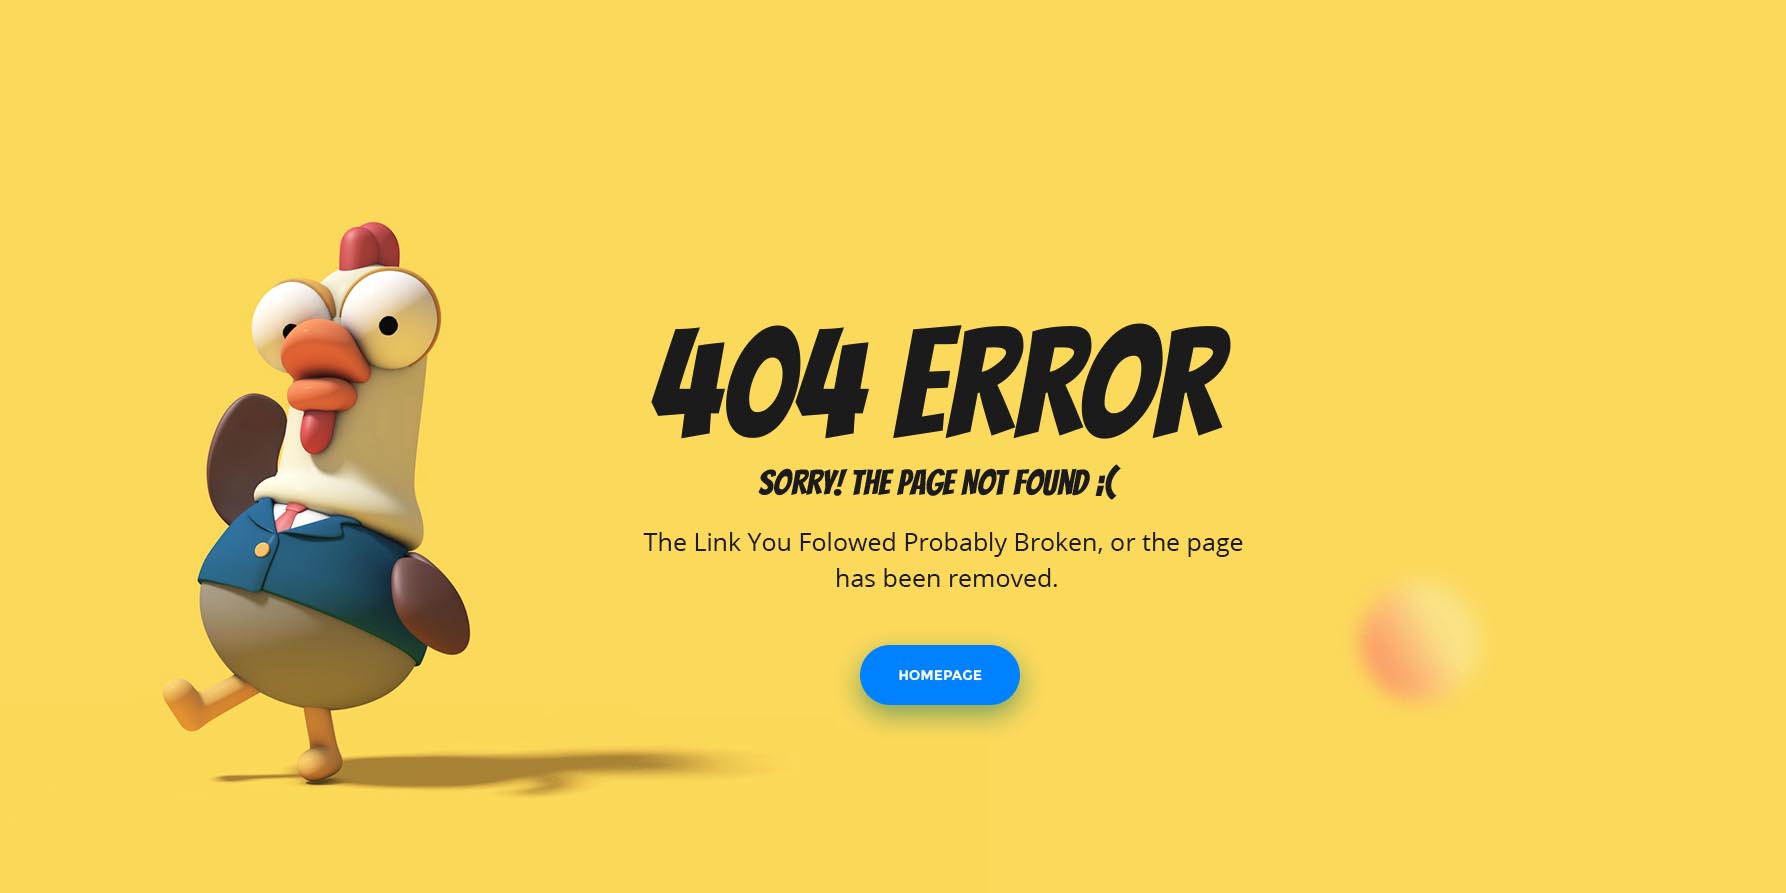 TOP5: 404 Error Pages